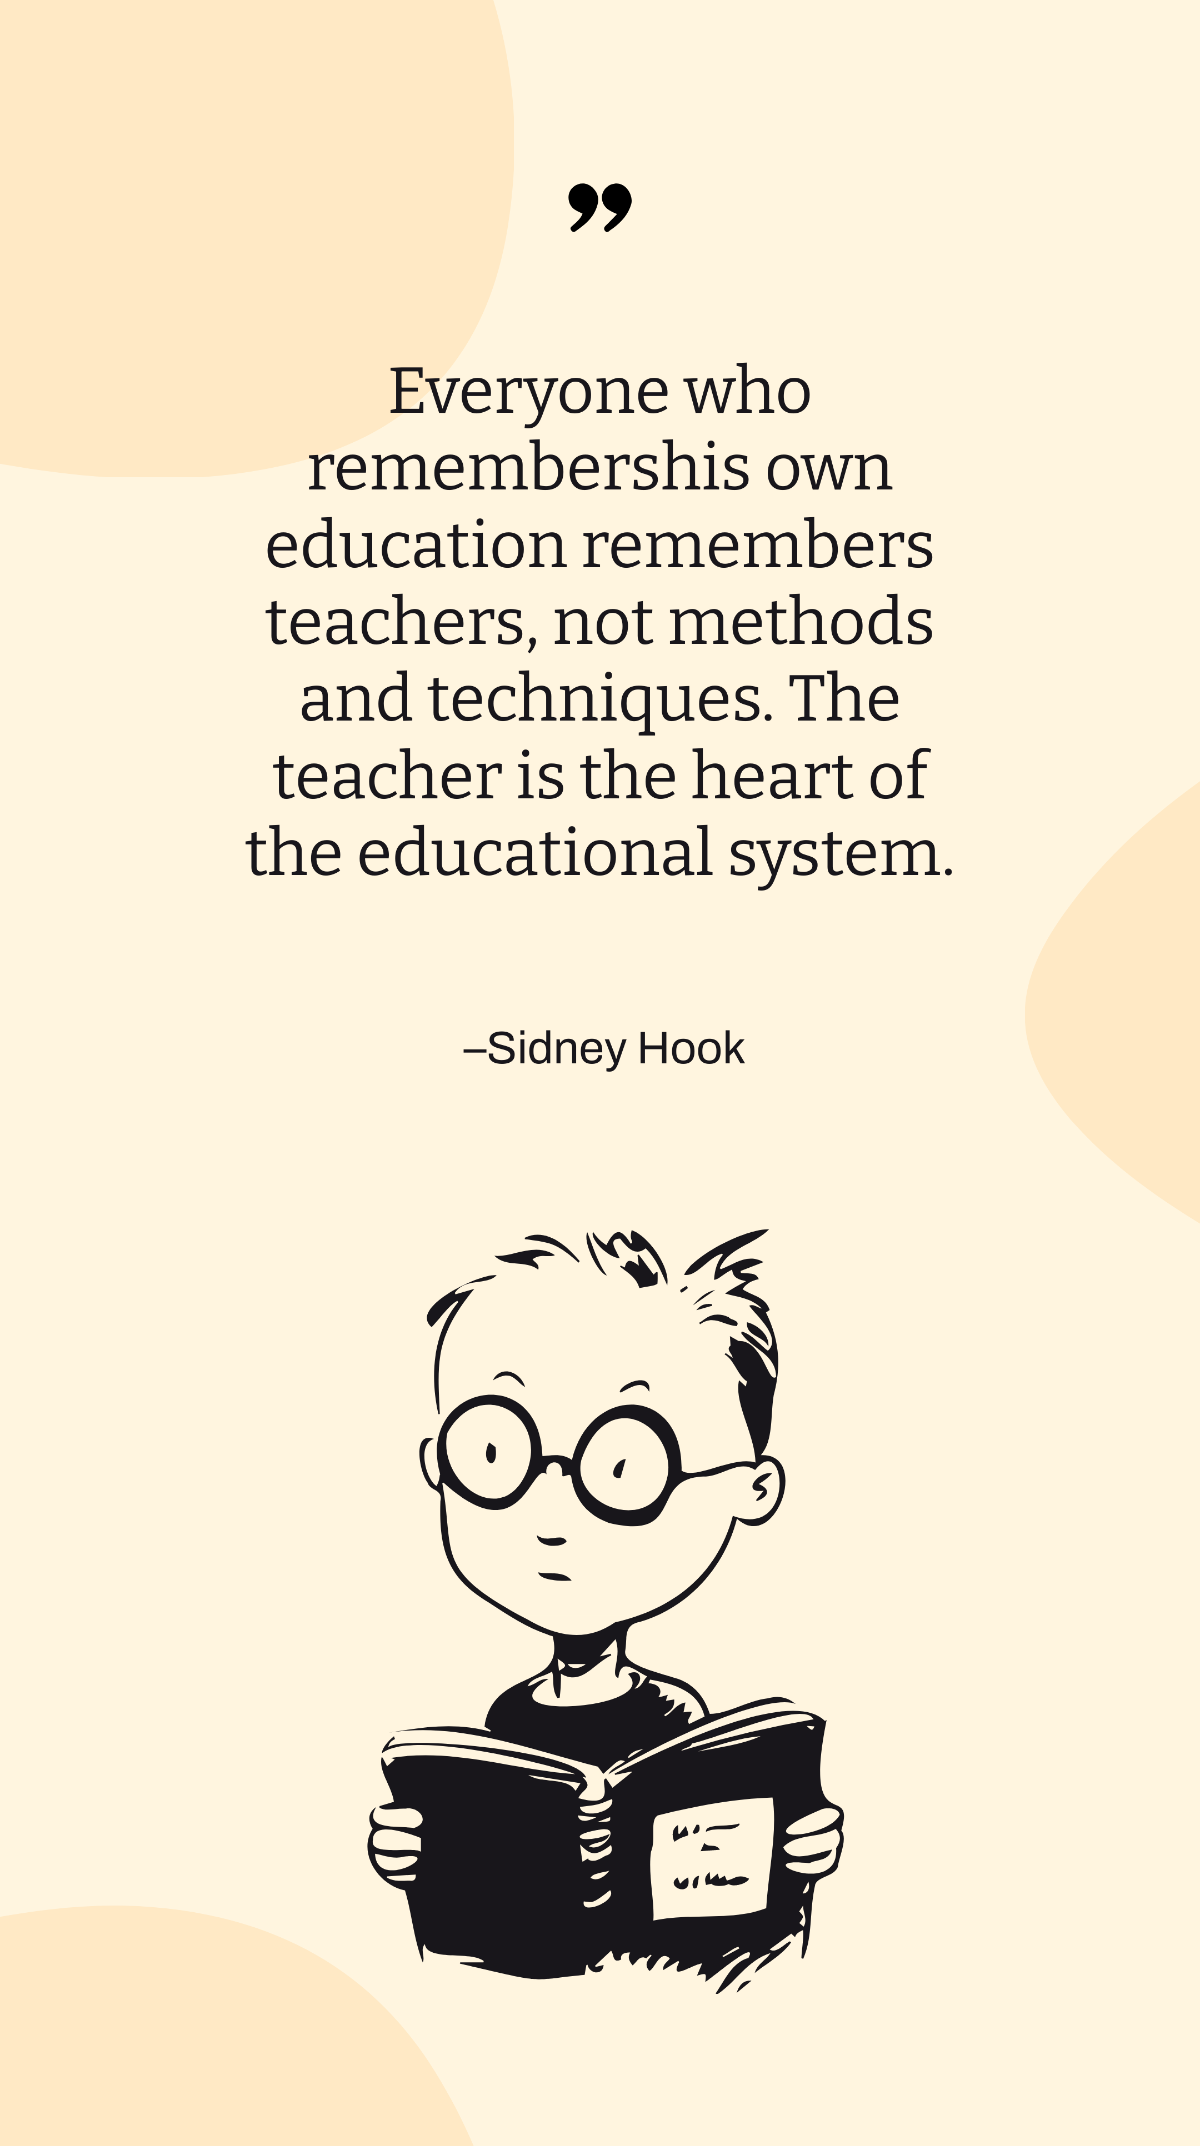 Free Sidney Hook - Everyone who remembers his own education remembers teachers, not methods and techniques. The teacher is the heart of the educational system. Template